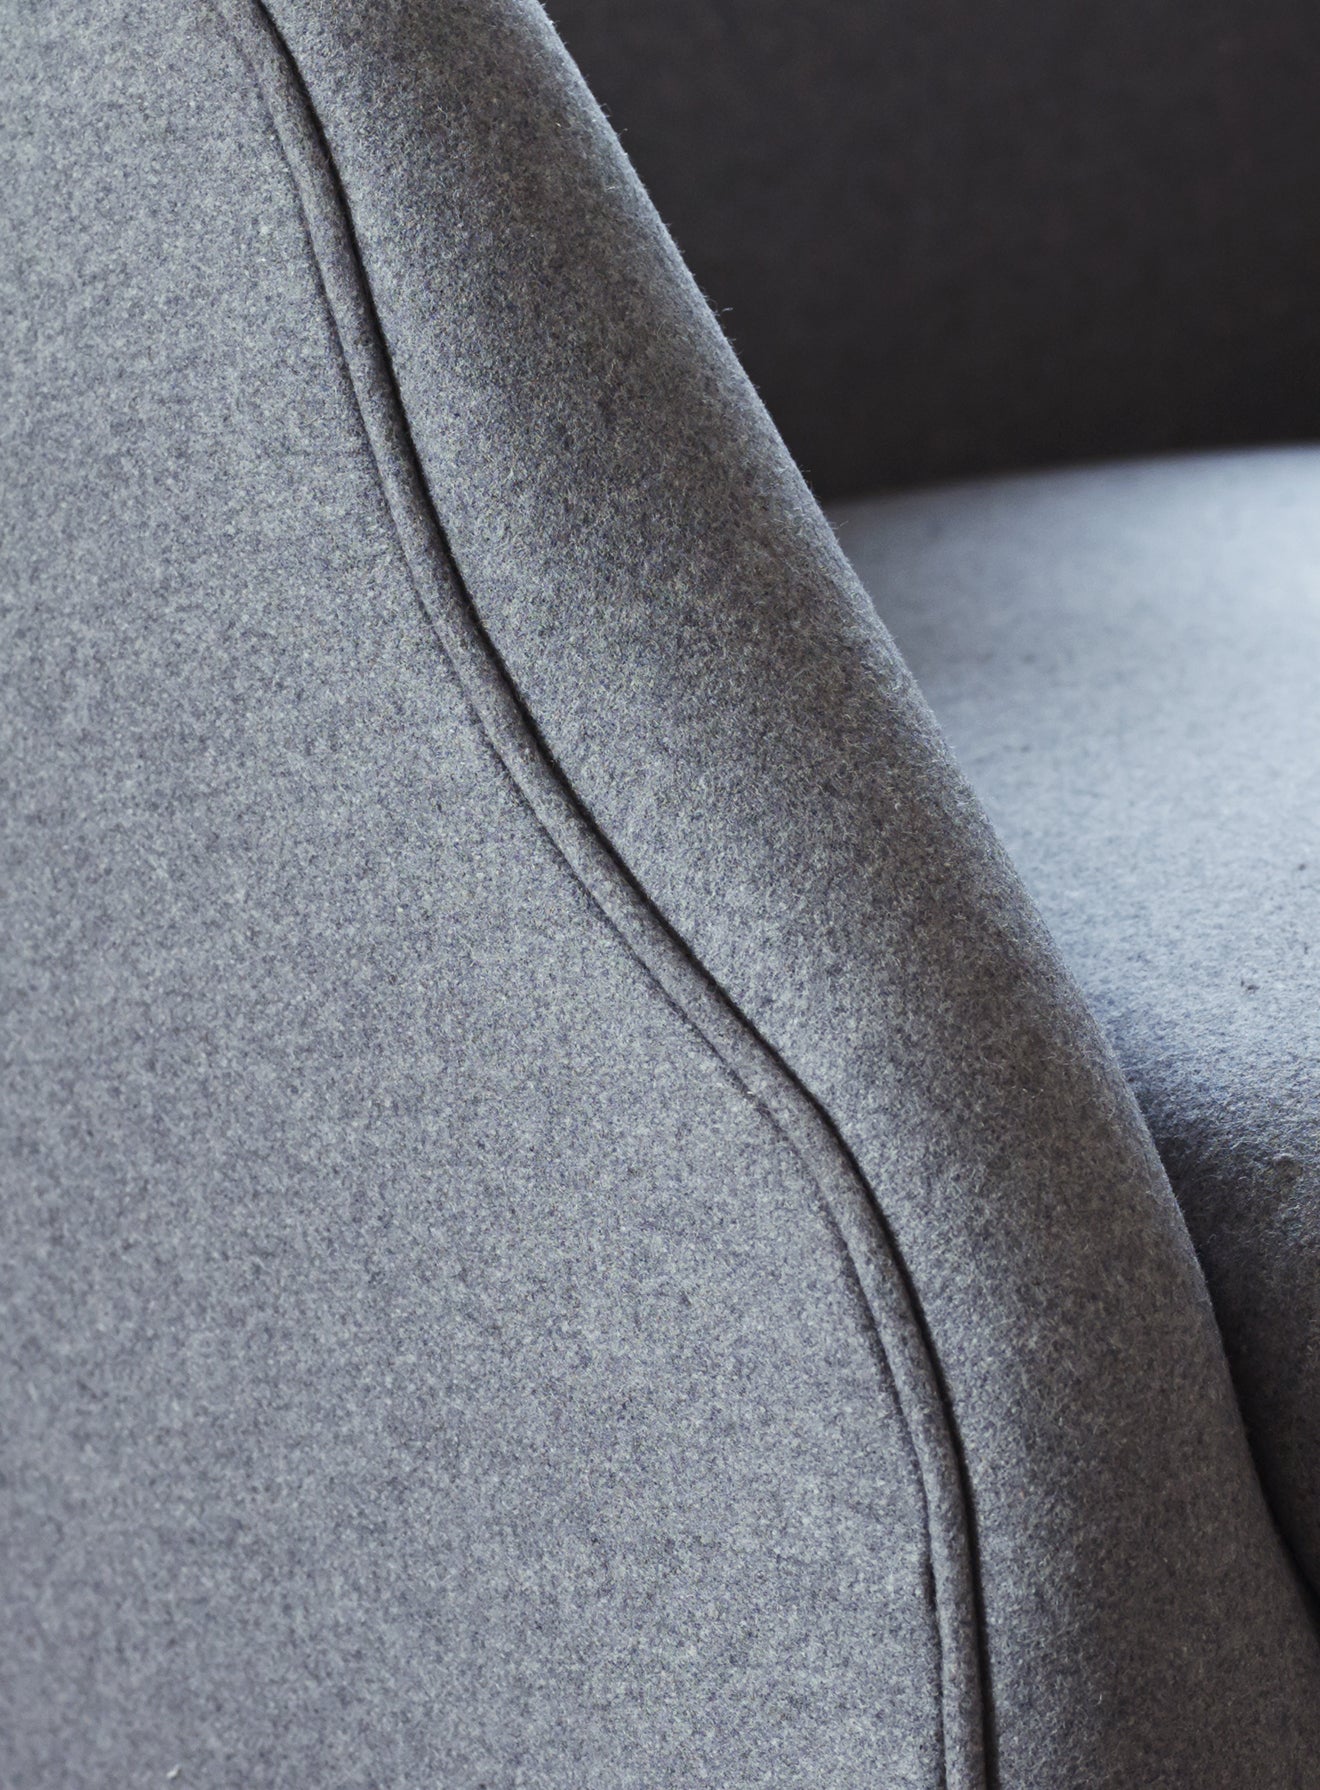 Bromley Wingback Chair, Grey Wool